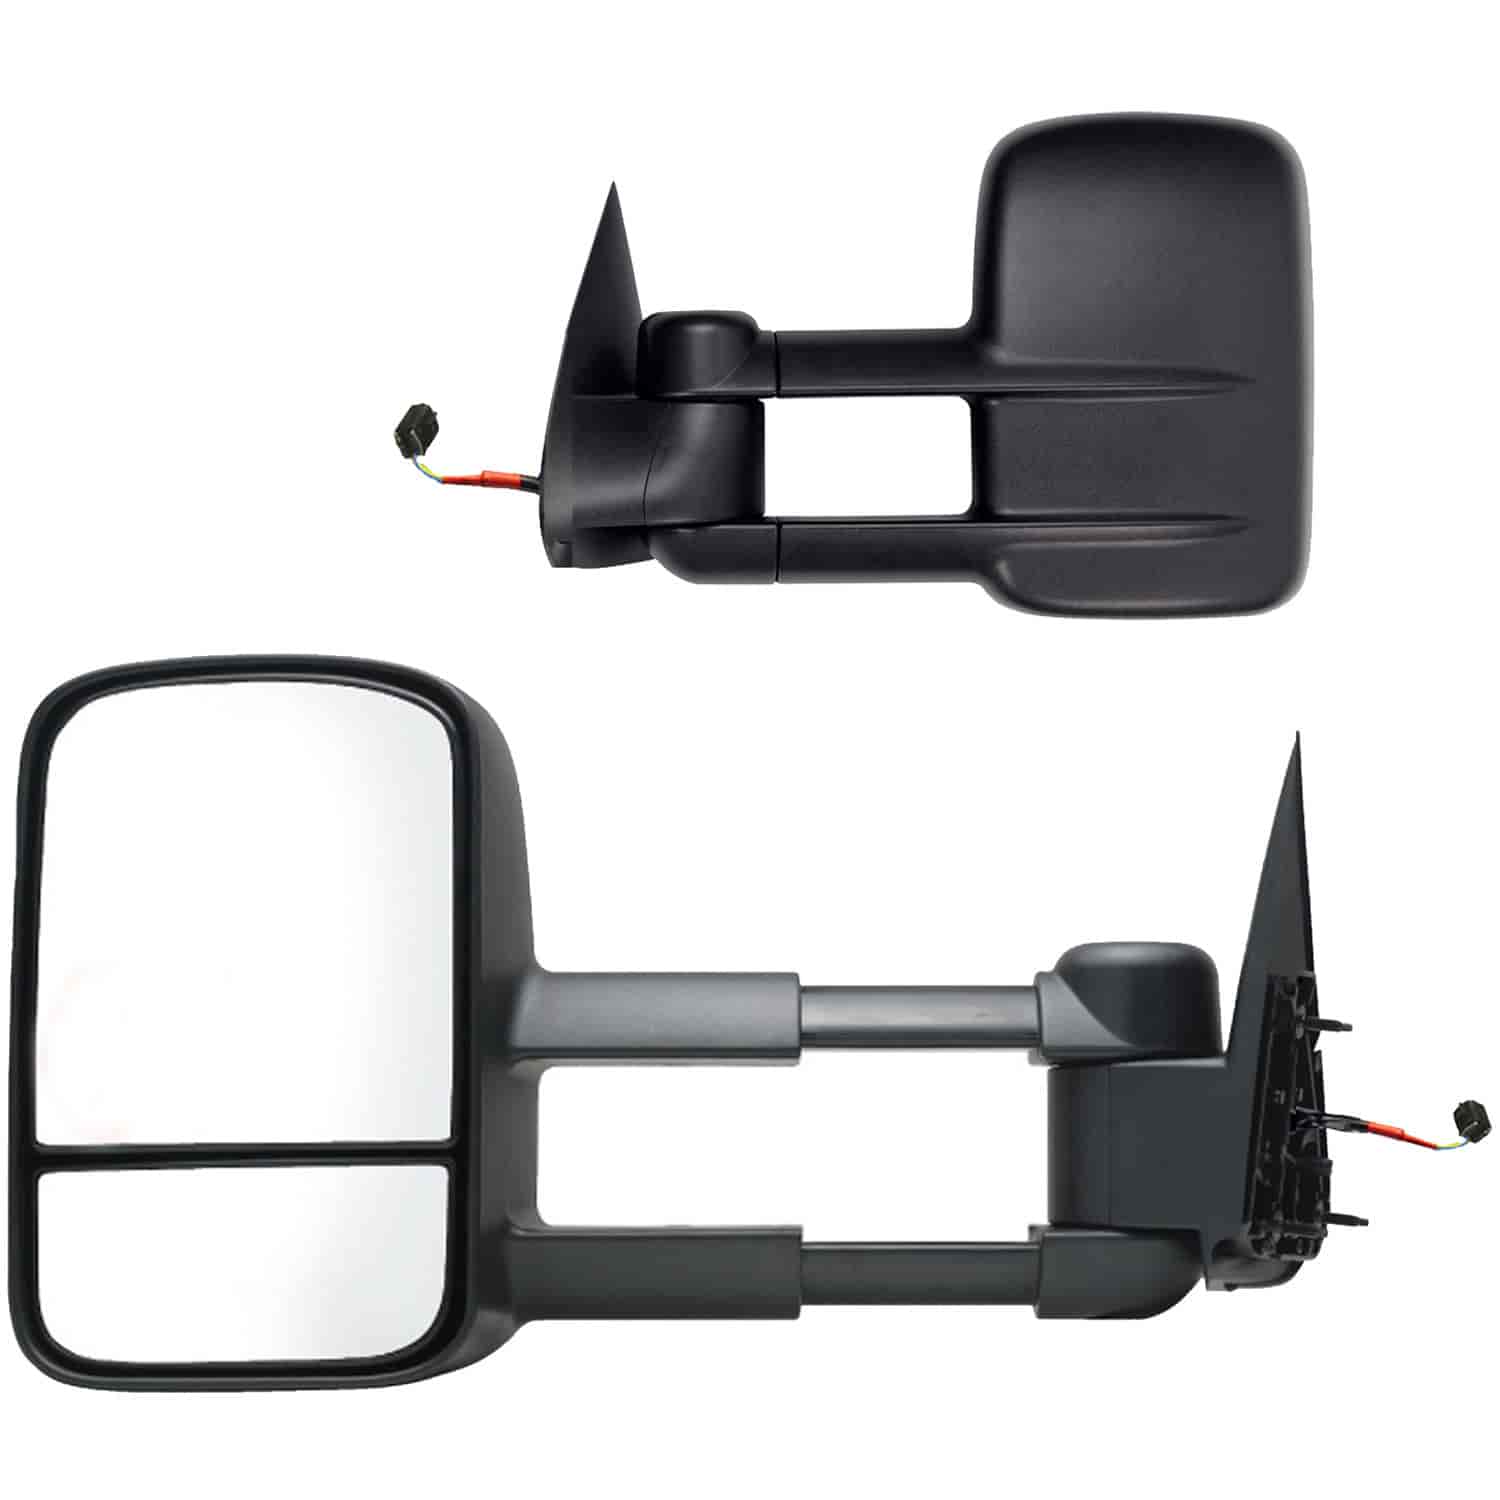 OEM Style Replacement mirror set for 99-02 Silverado